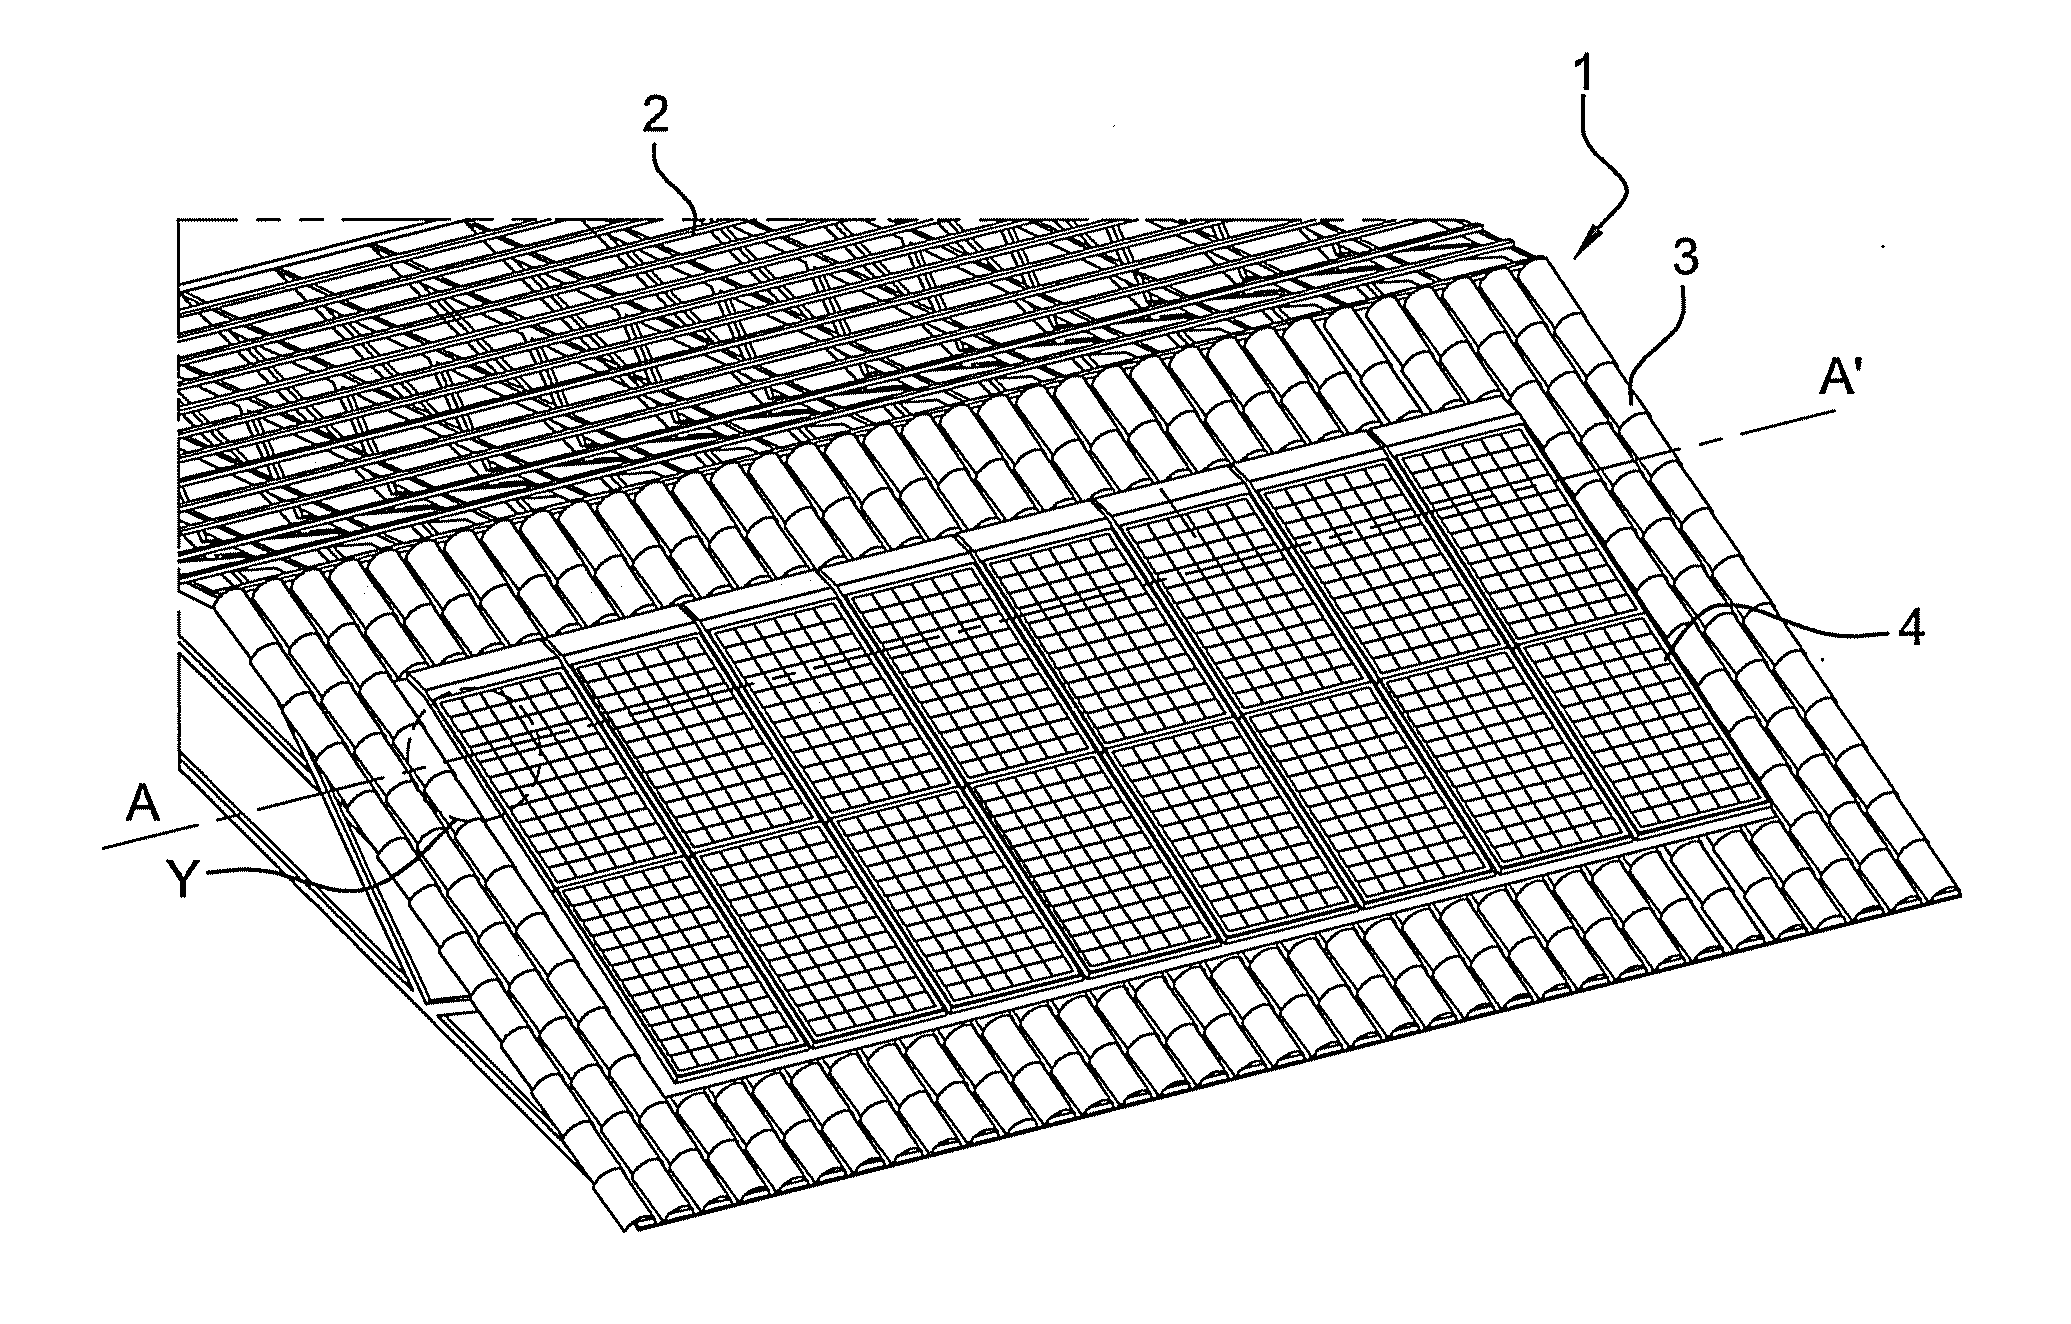 Structure for rigidly connecting solar panels to a fixture